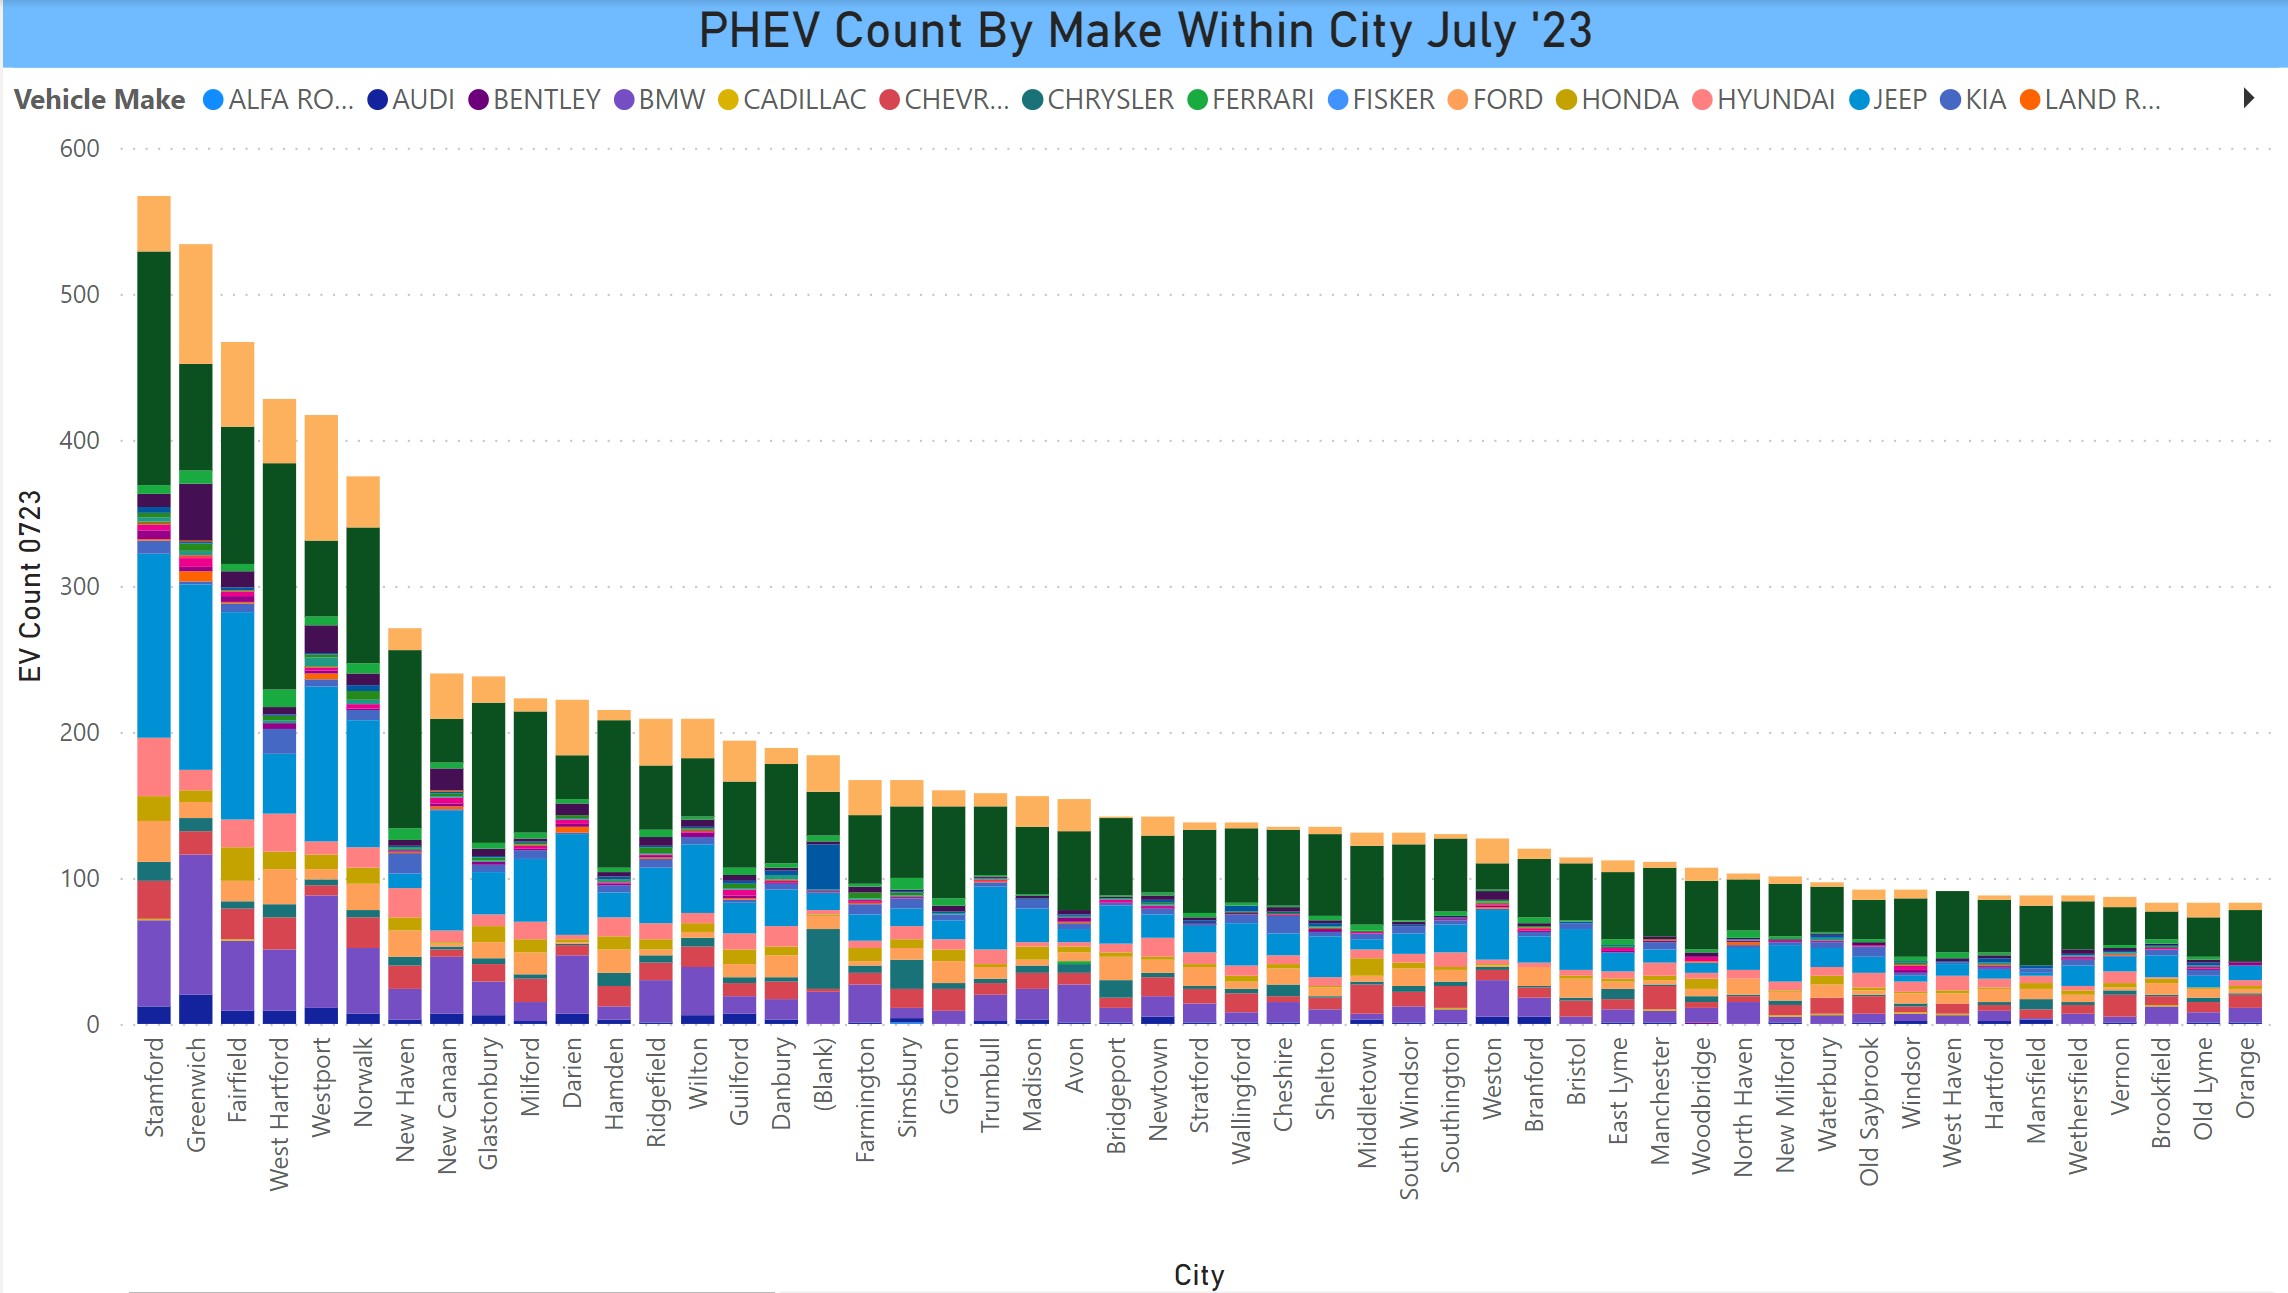 PHEV Count by Make Within City July 2023